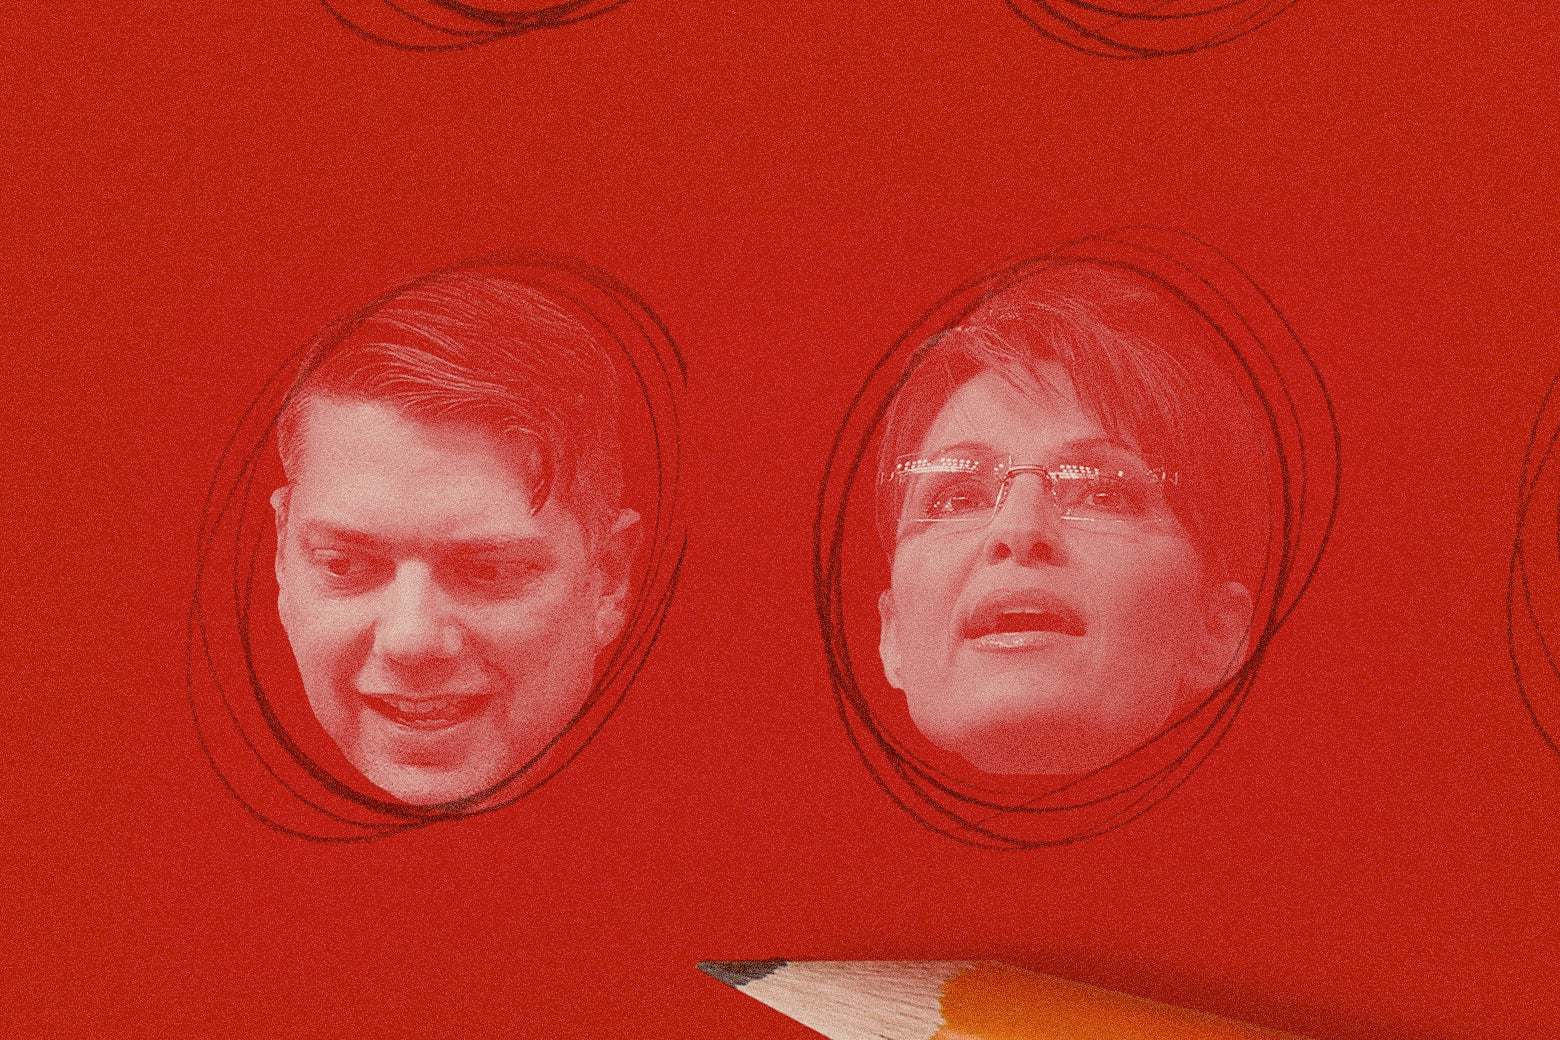 photo illustration of Nick Begich III and Sara Palin's faces on a red background with circles drawn around them